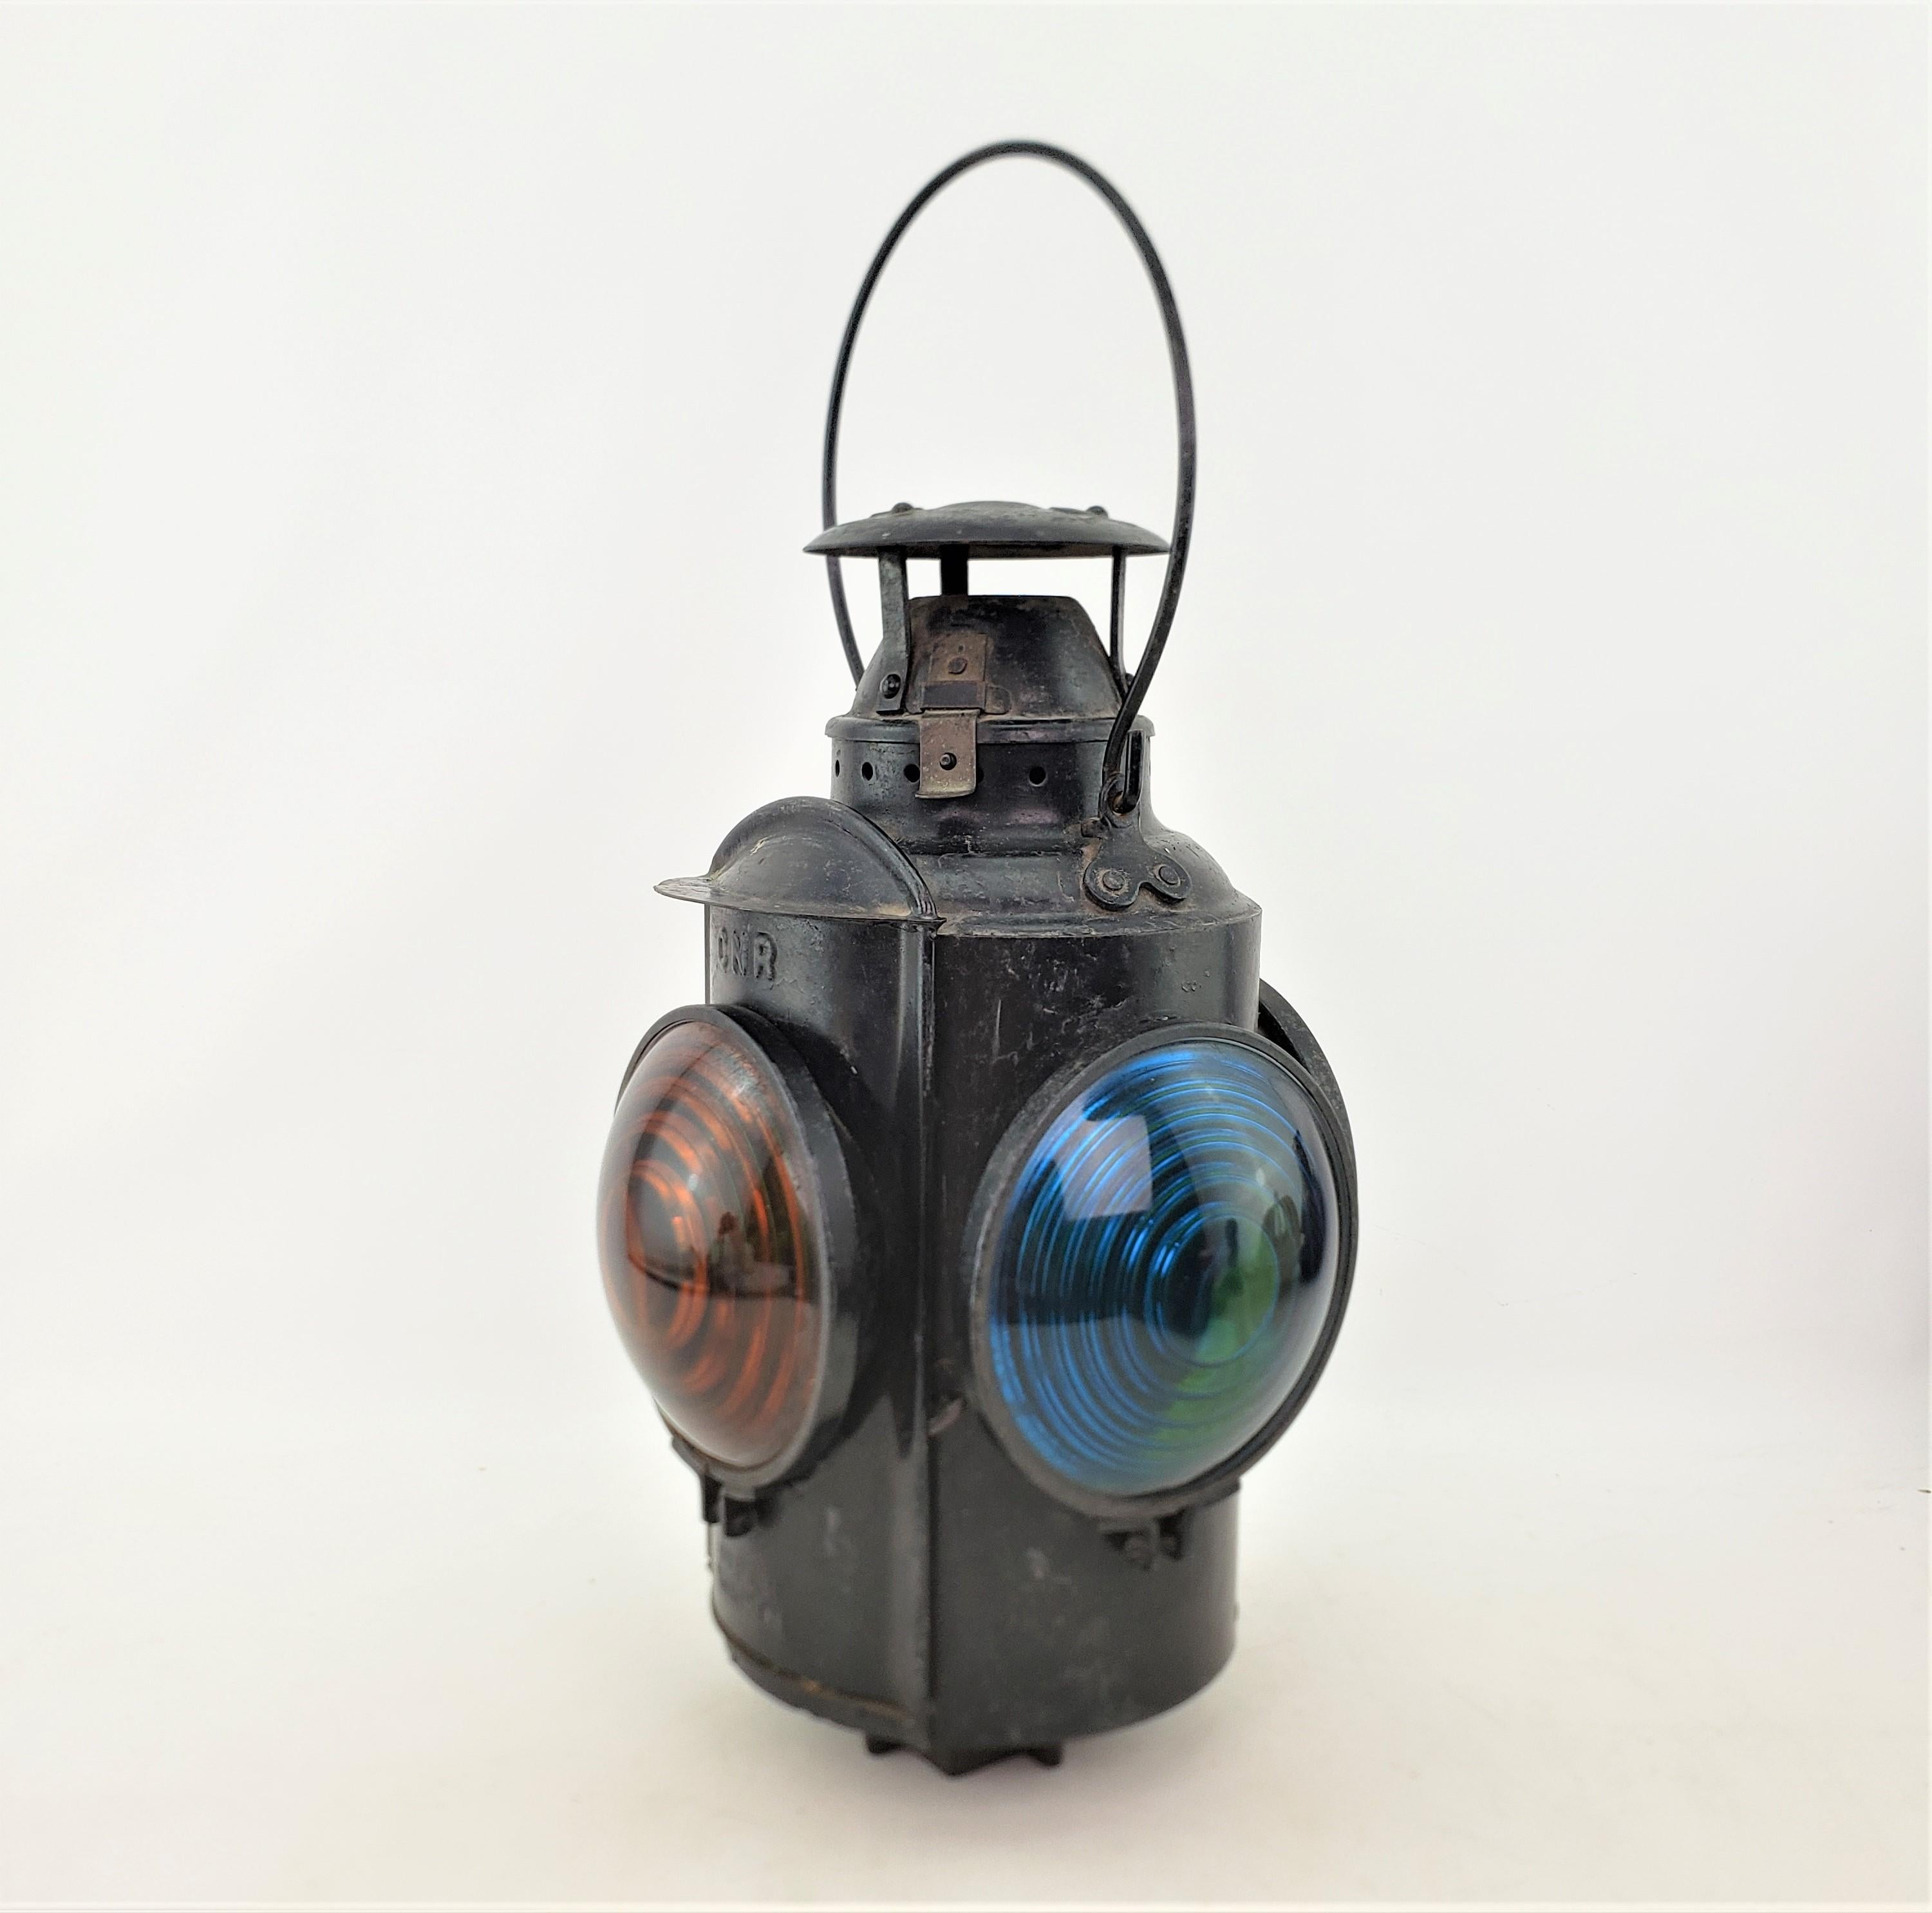 This antique railroad lantern was made by the Hiram L. Piper Company of Canada and date to approximately 1920 and was made for the Canadian National Railroad. The lantern has a heavy metal exterior shell with amber and green molded glass lenses. The